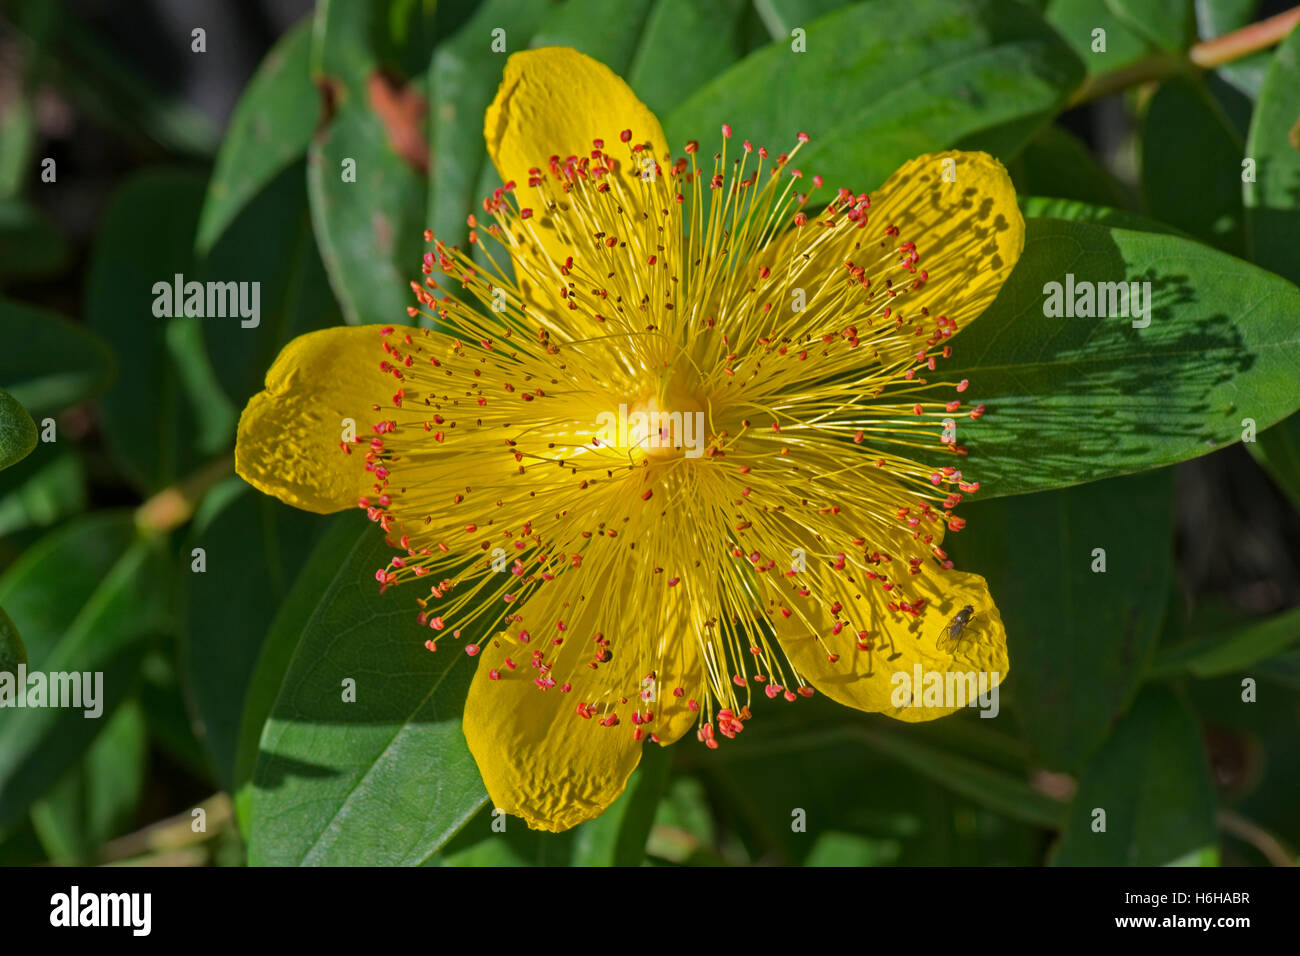 Flower of rose of Sharon, Hypericum calycinum, with yellow flower and numerous stamens with red anthers Stock Photo